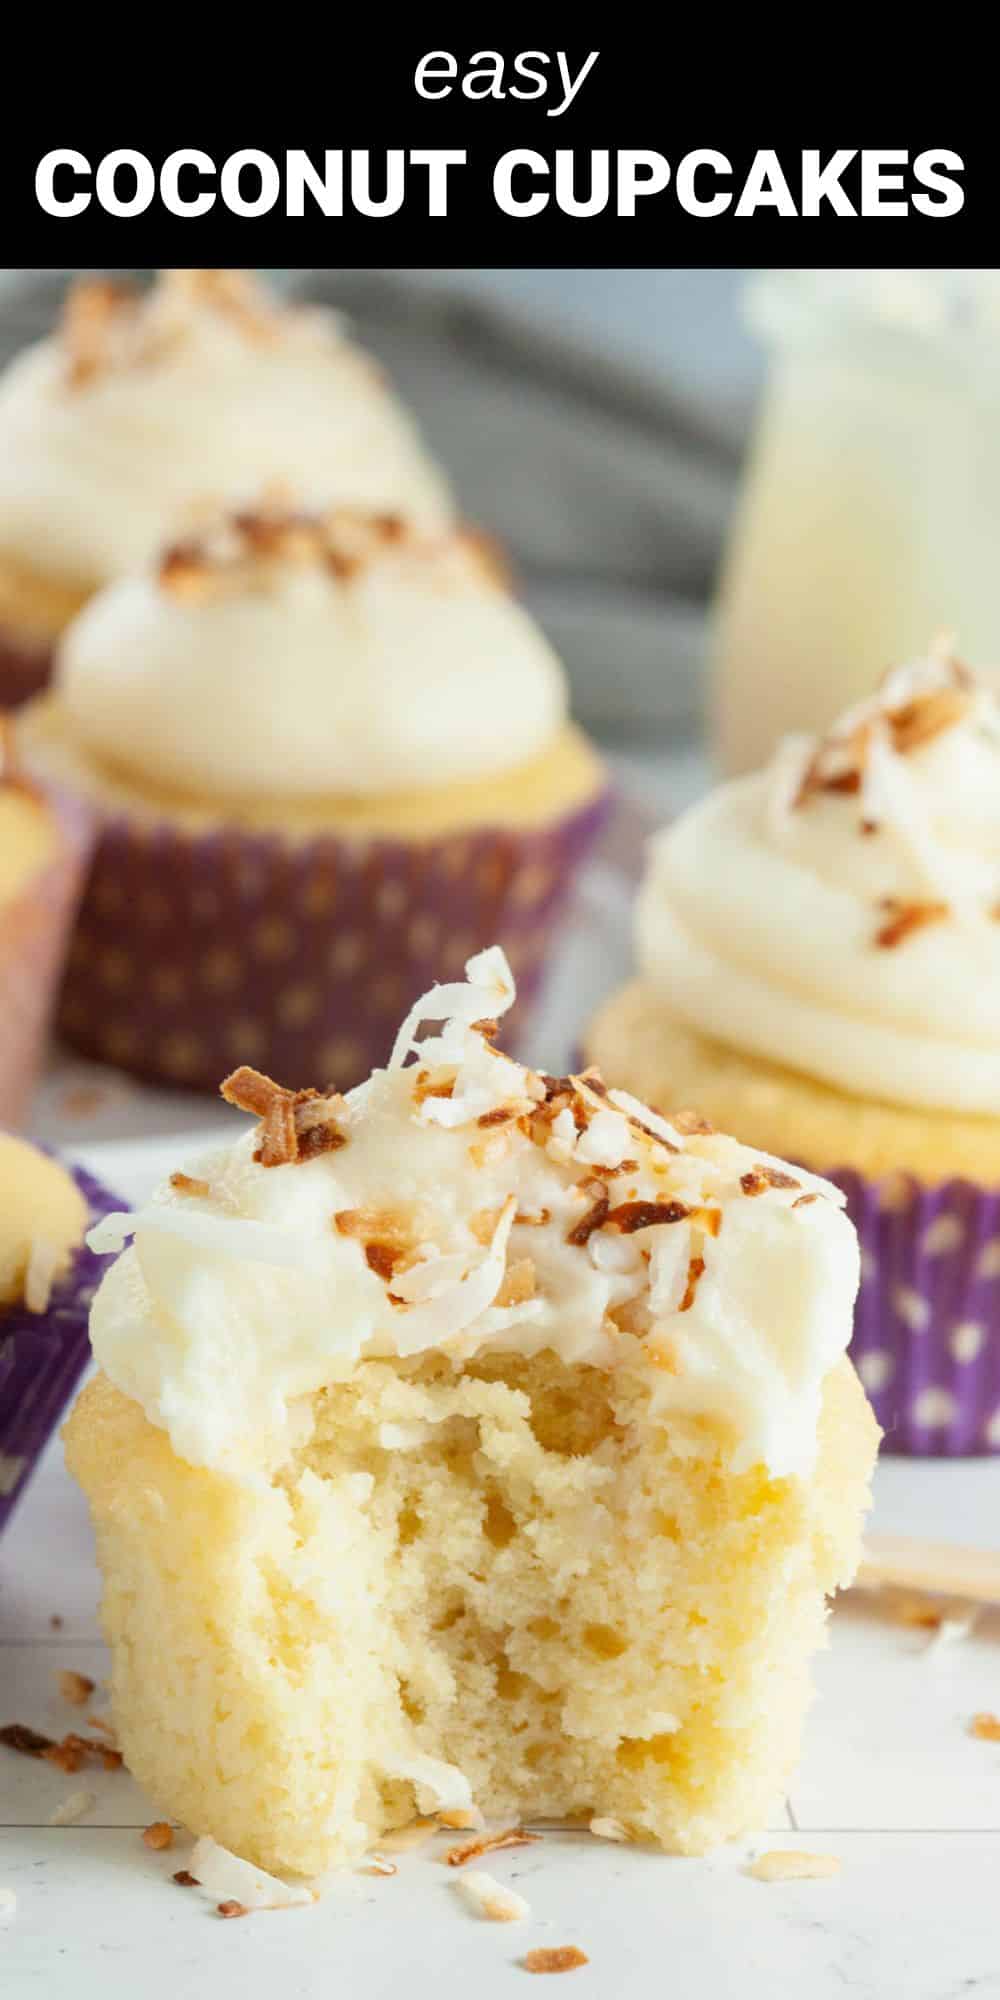 These coconut cupcakes are a delicious tropical dessert that’s perfect for your next party. Impress your guests with these moist and creamy treats that look and taste like they came from a fancy bakery!